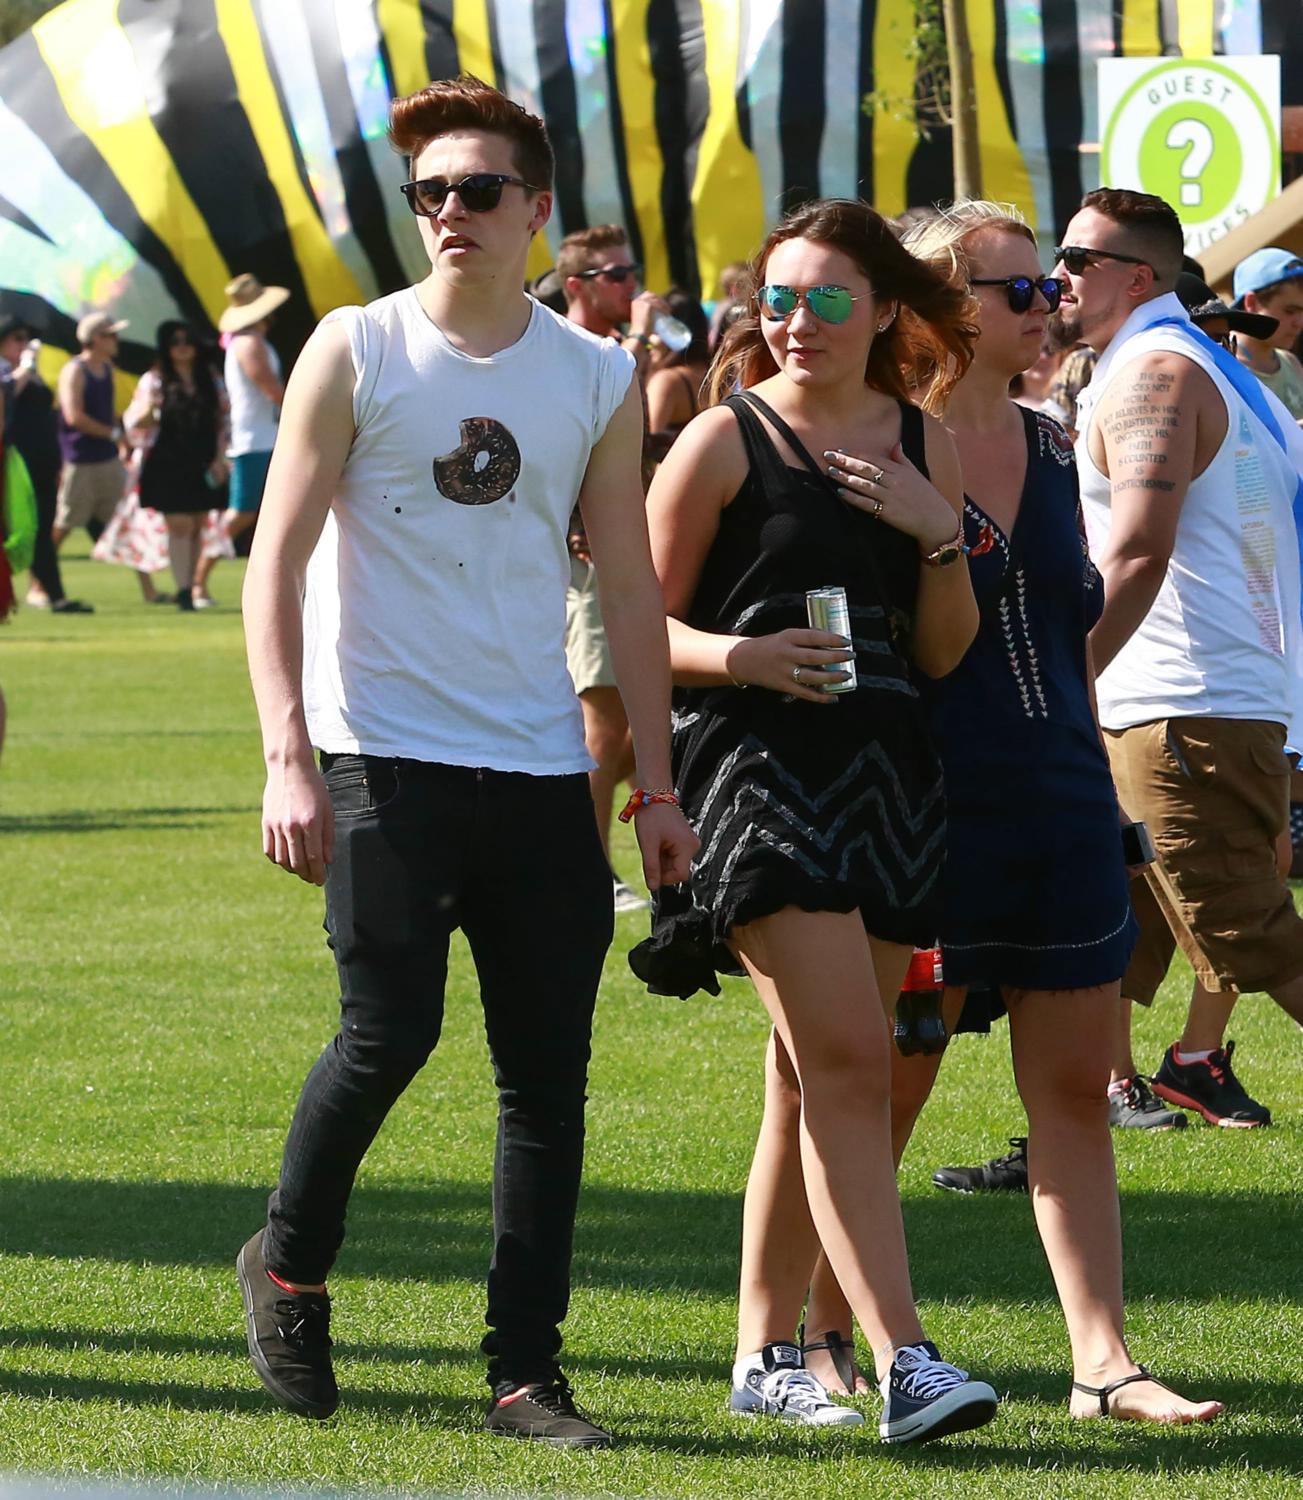 Brooklyn Beckham at The Coachella Valley Music and Arts Festival